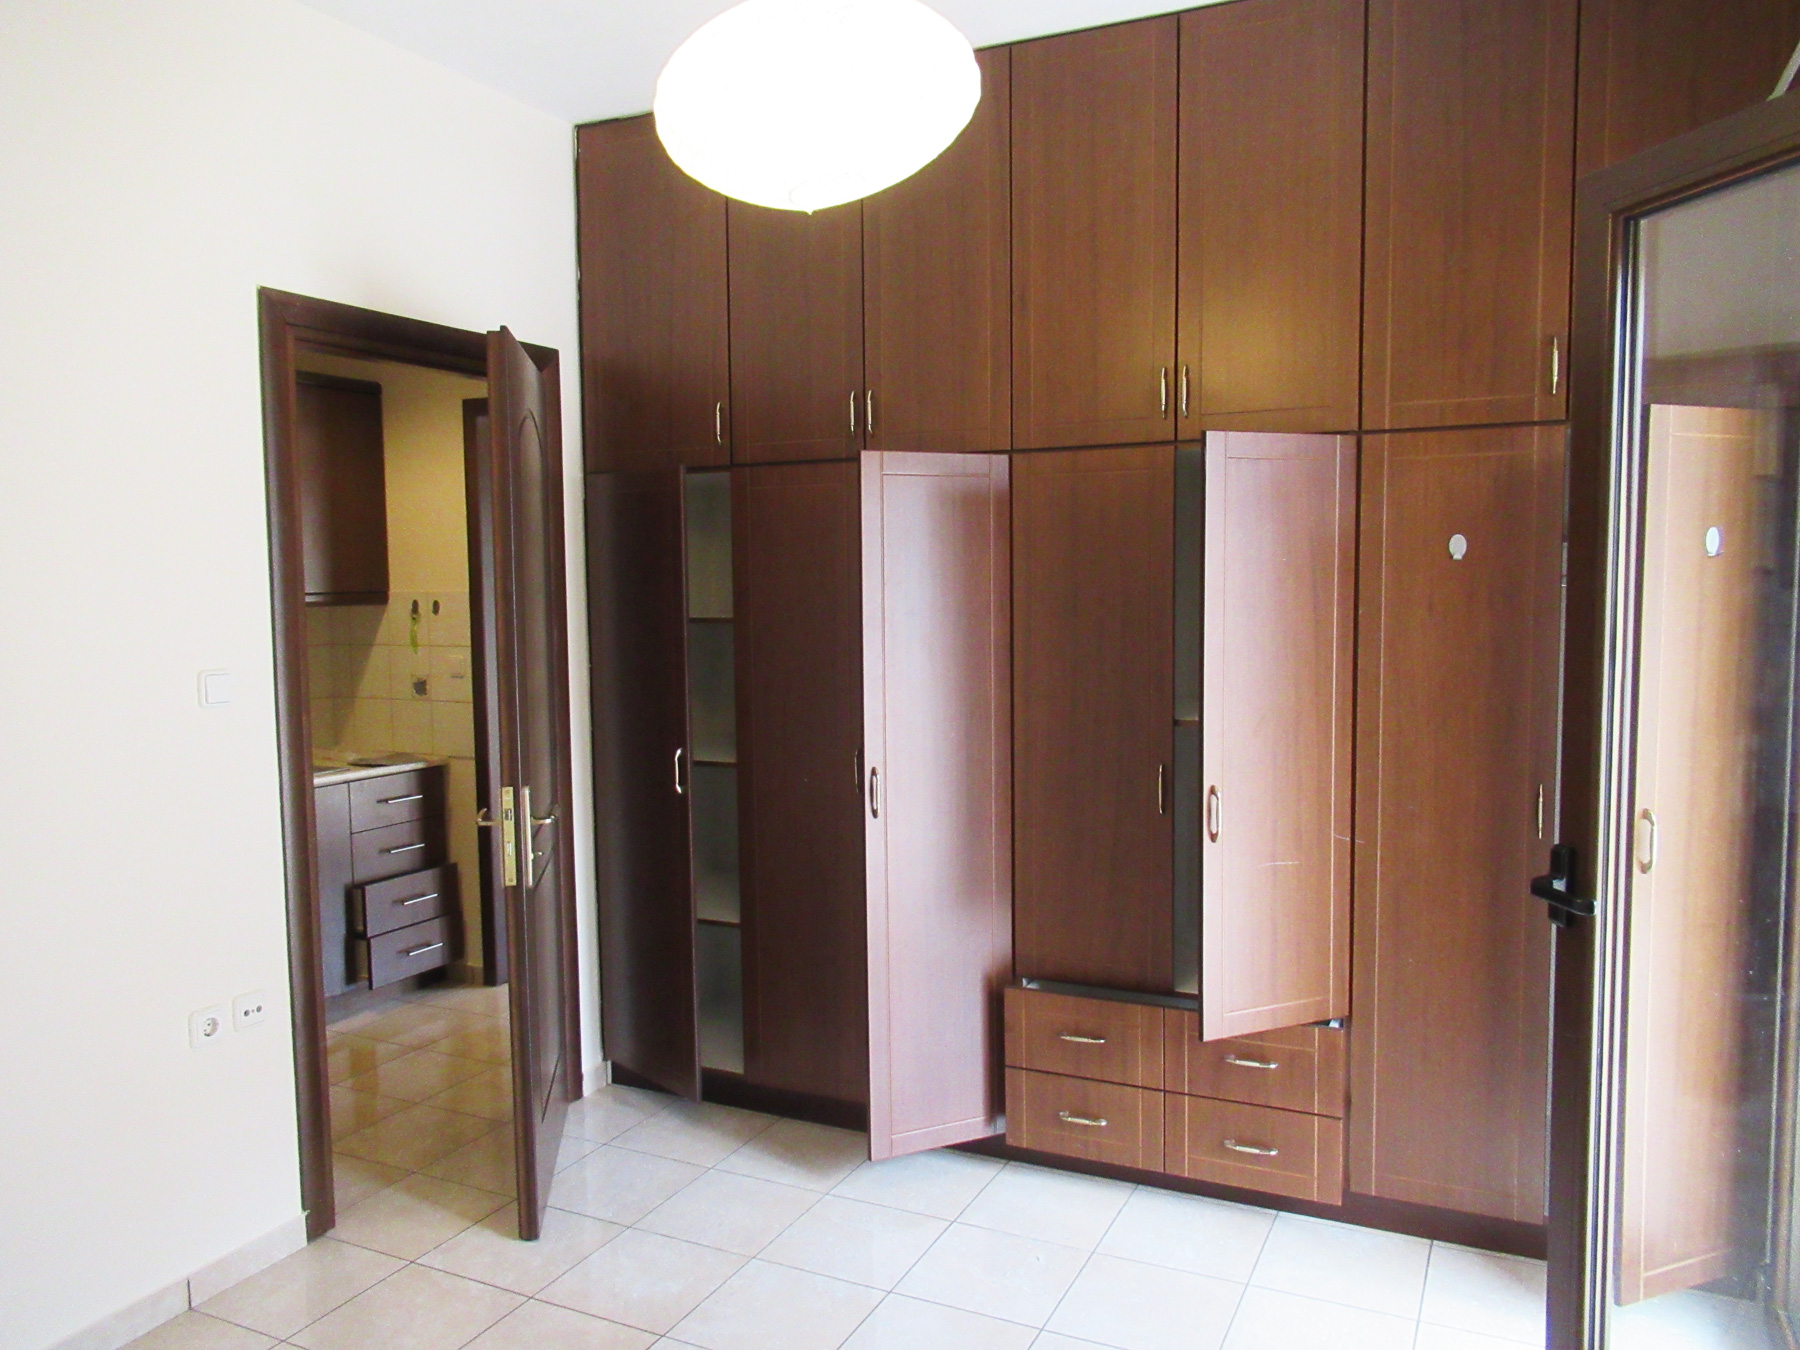 For rent two-room studio of 35 sq.m. on the 1st floor near the center of Ioannina